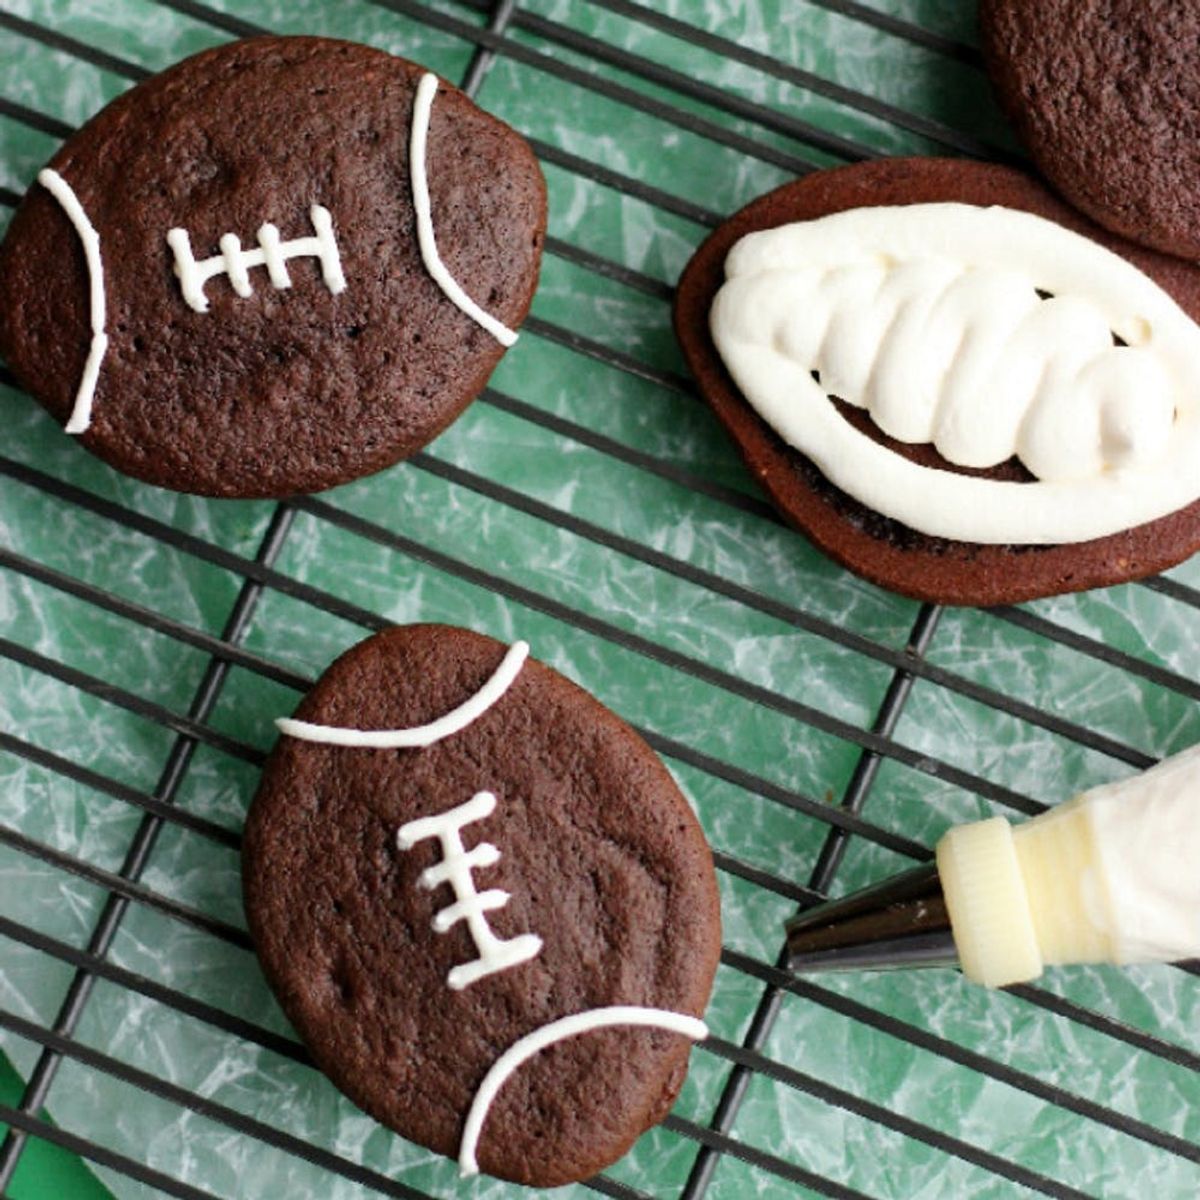 19 Football-Shaped Snack Recipes to Tackle for the Super Bowl